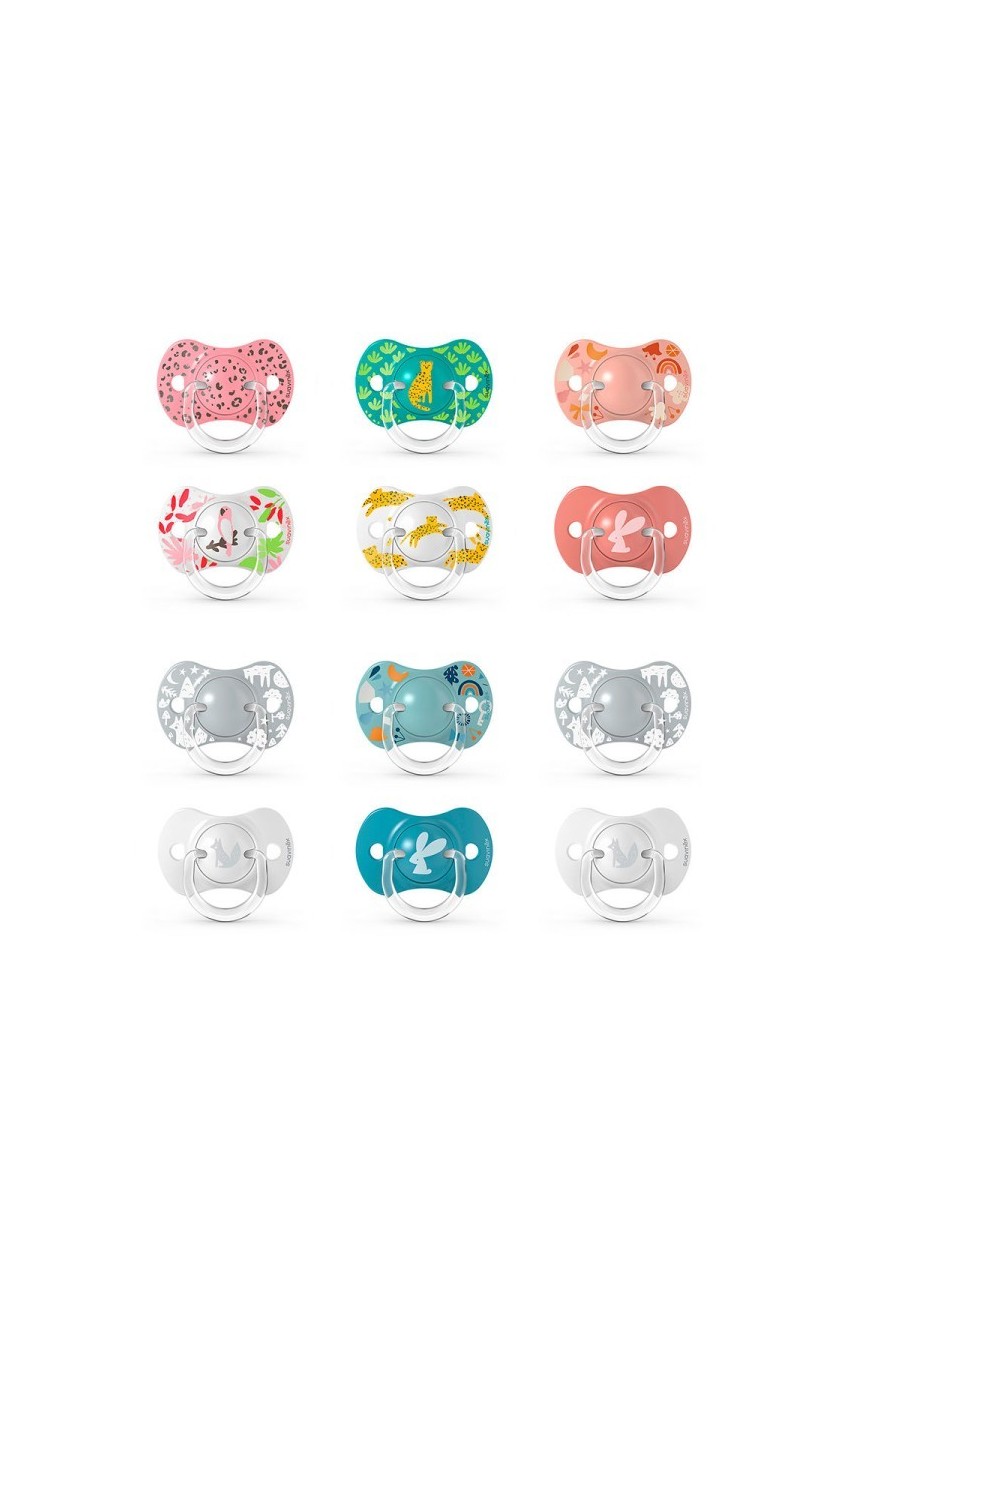 Suavinex Pacifier Physiological SX Pro Silicone 0-6m 2 Uts